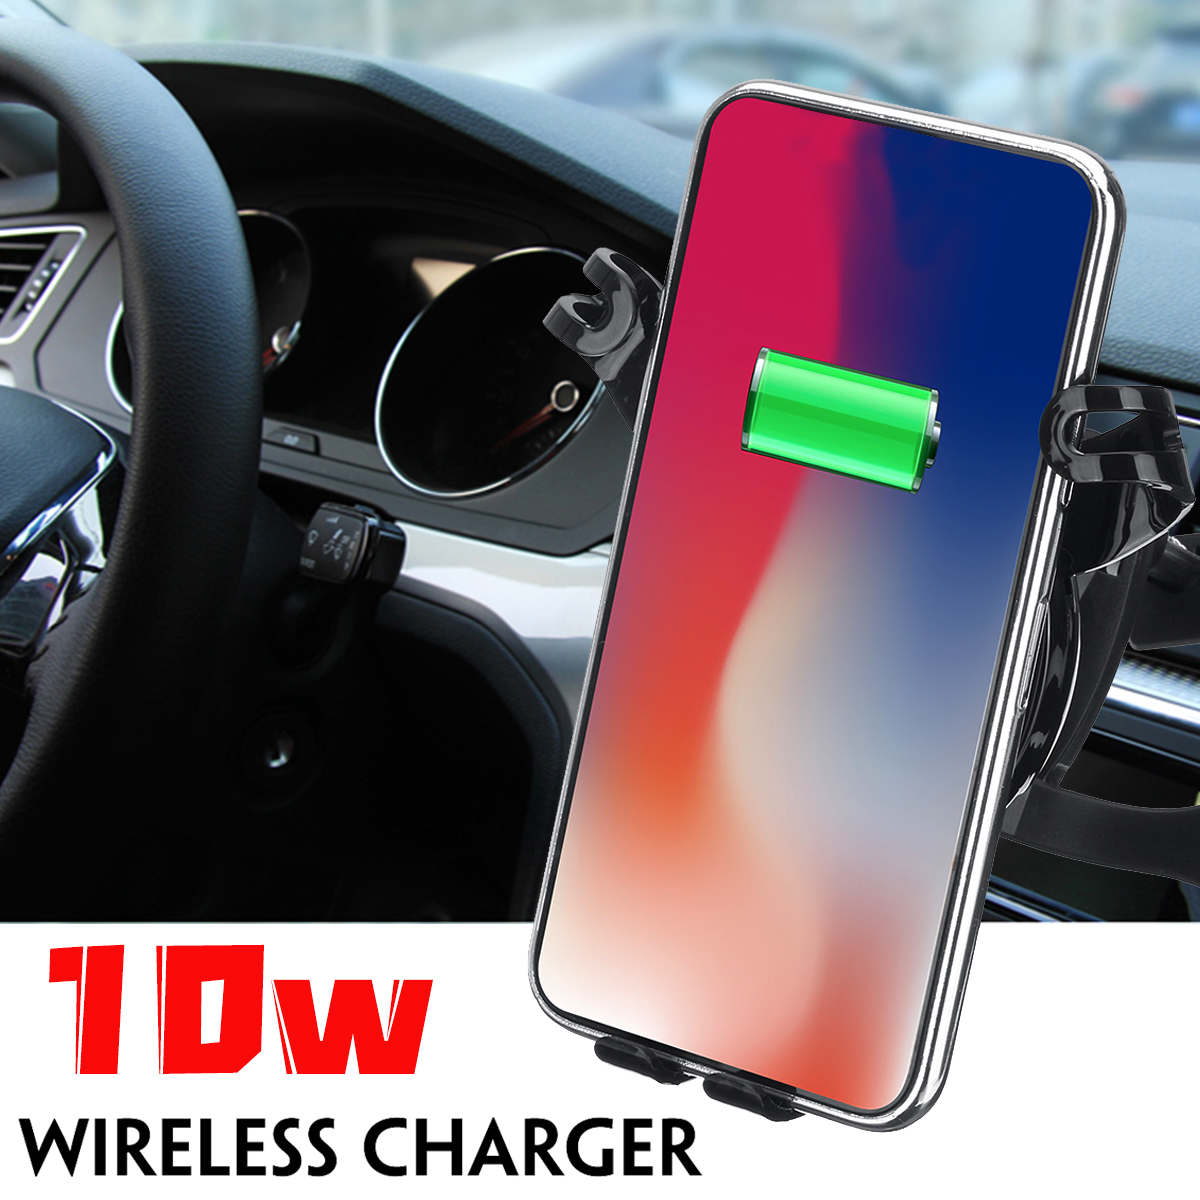 10W-Qi-Wireless-Charger-Gravity-Air-Vent-Car-Phone-Holder-For-47-65-inch-Smart-Phone-1545956-1